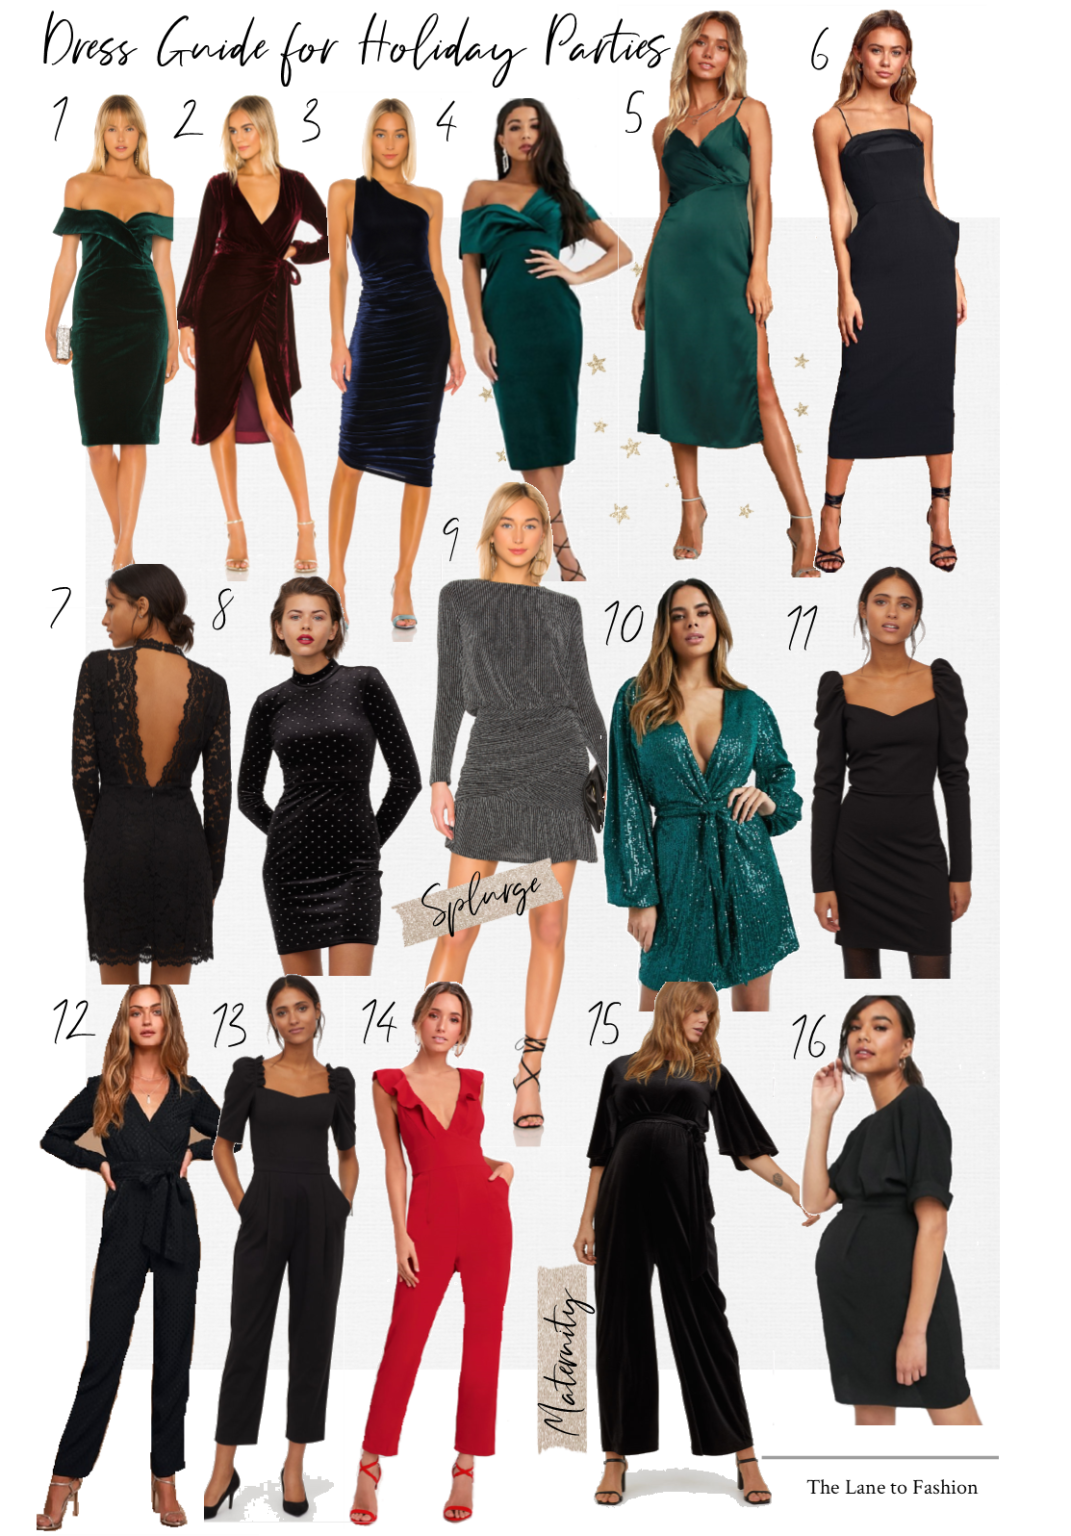 dress-guide-for-holiday-parties-the-lane-to-fashion